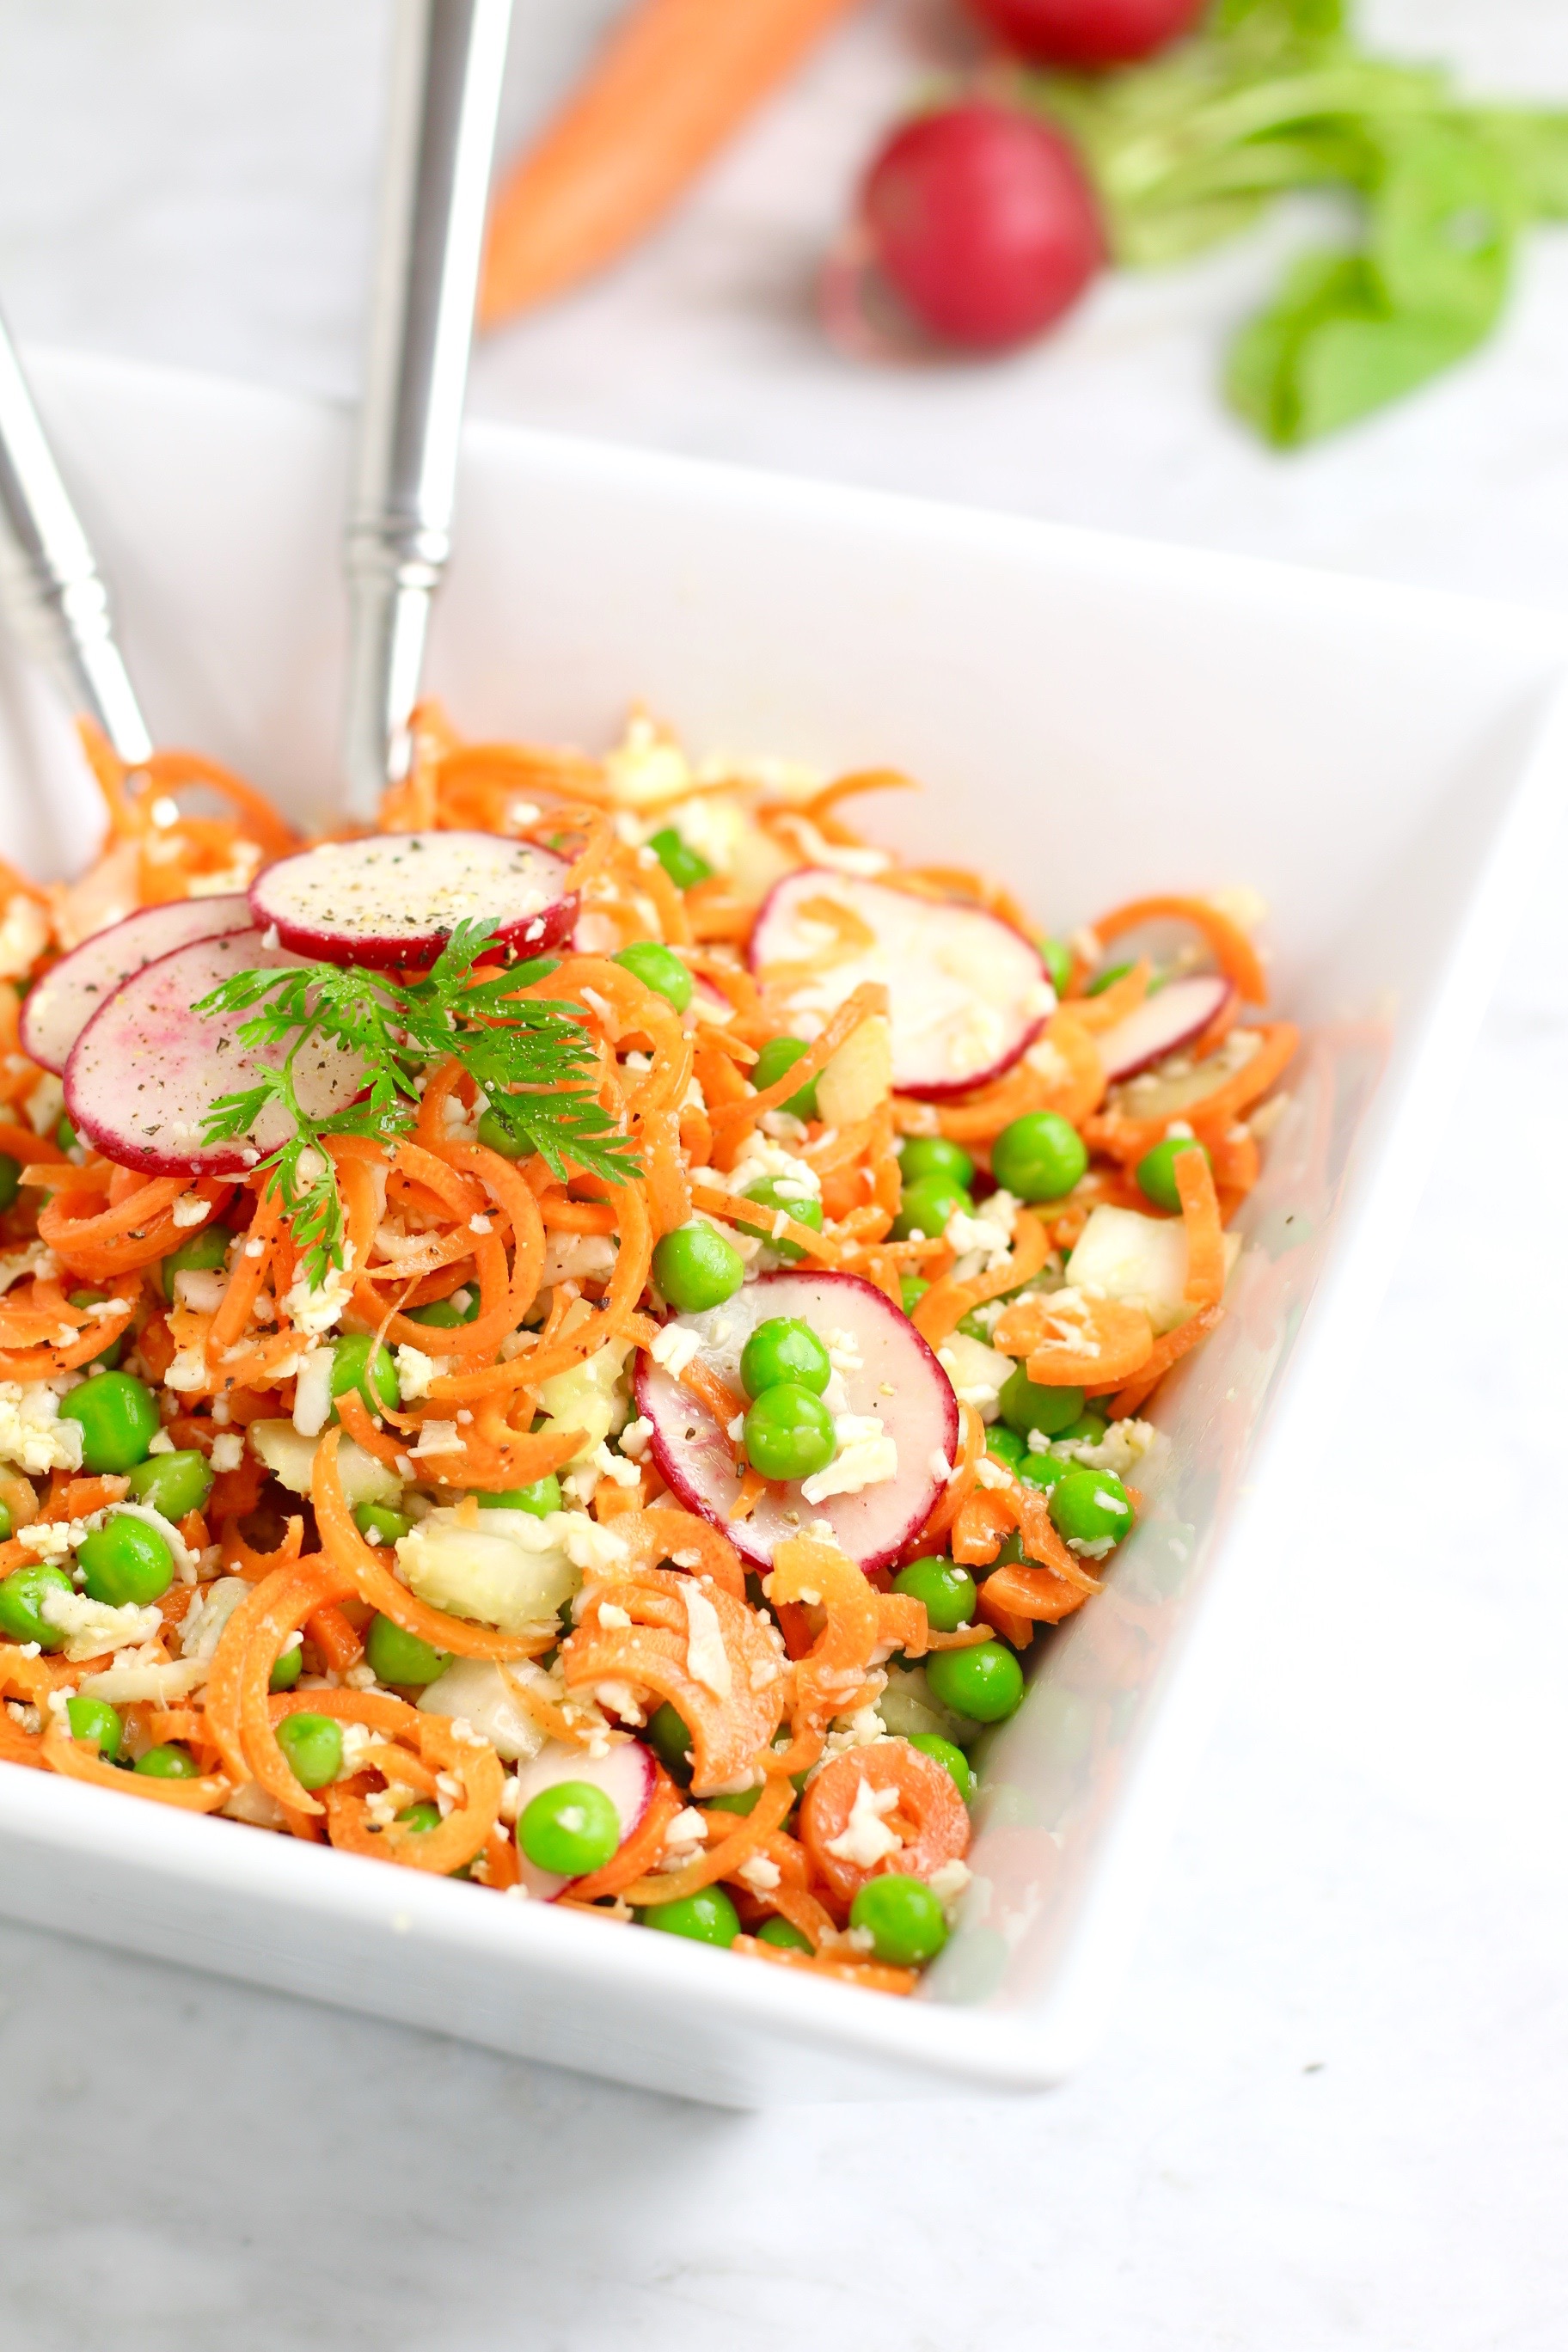 Pea and Carrot Salad